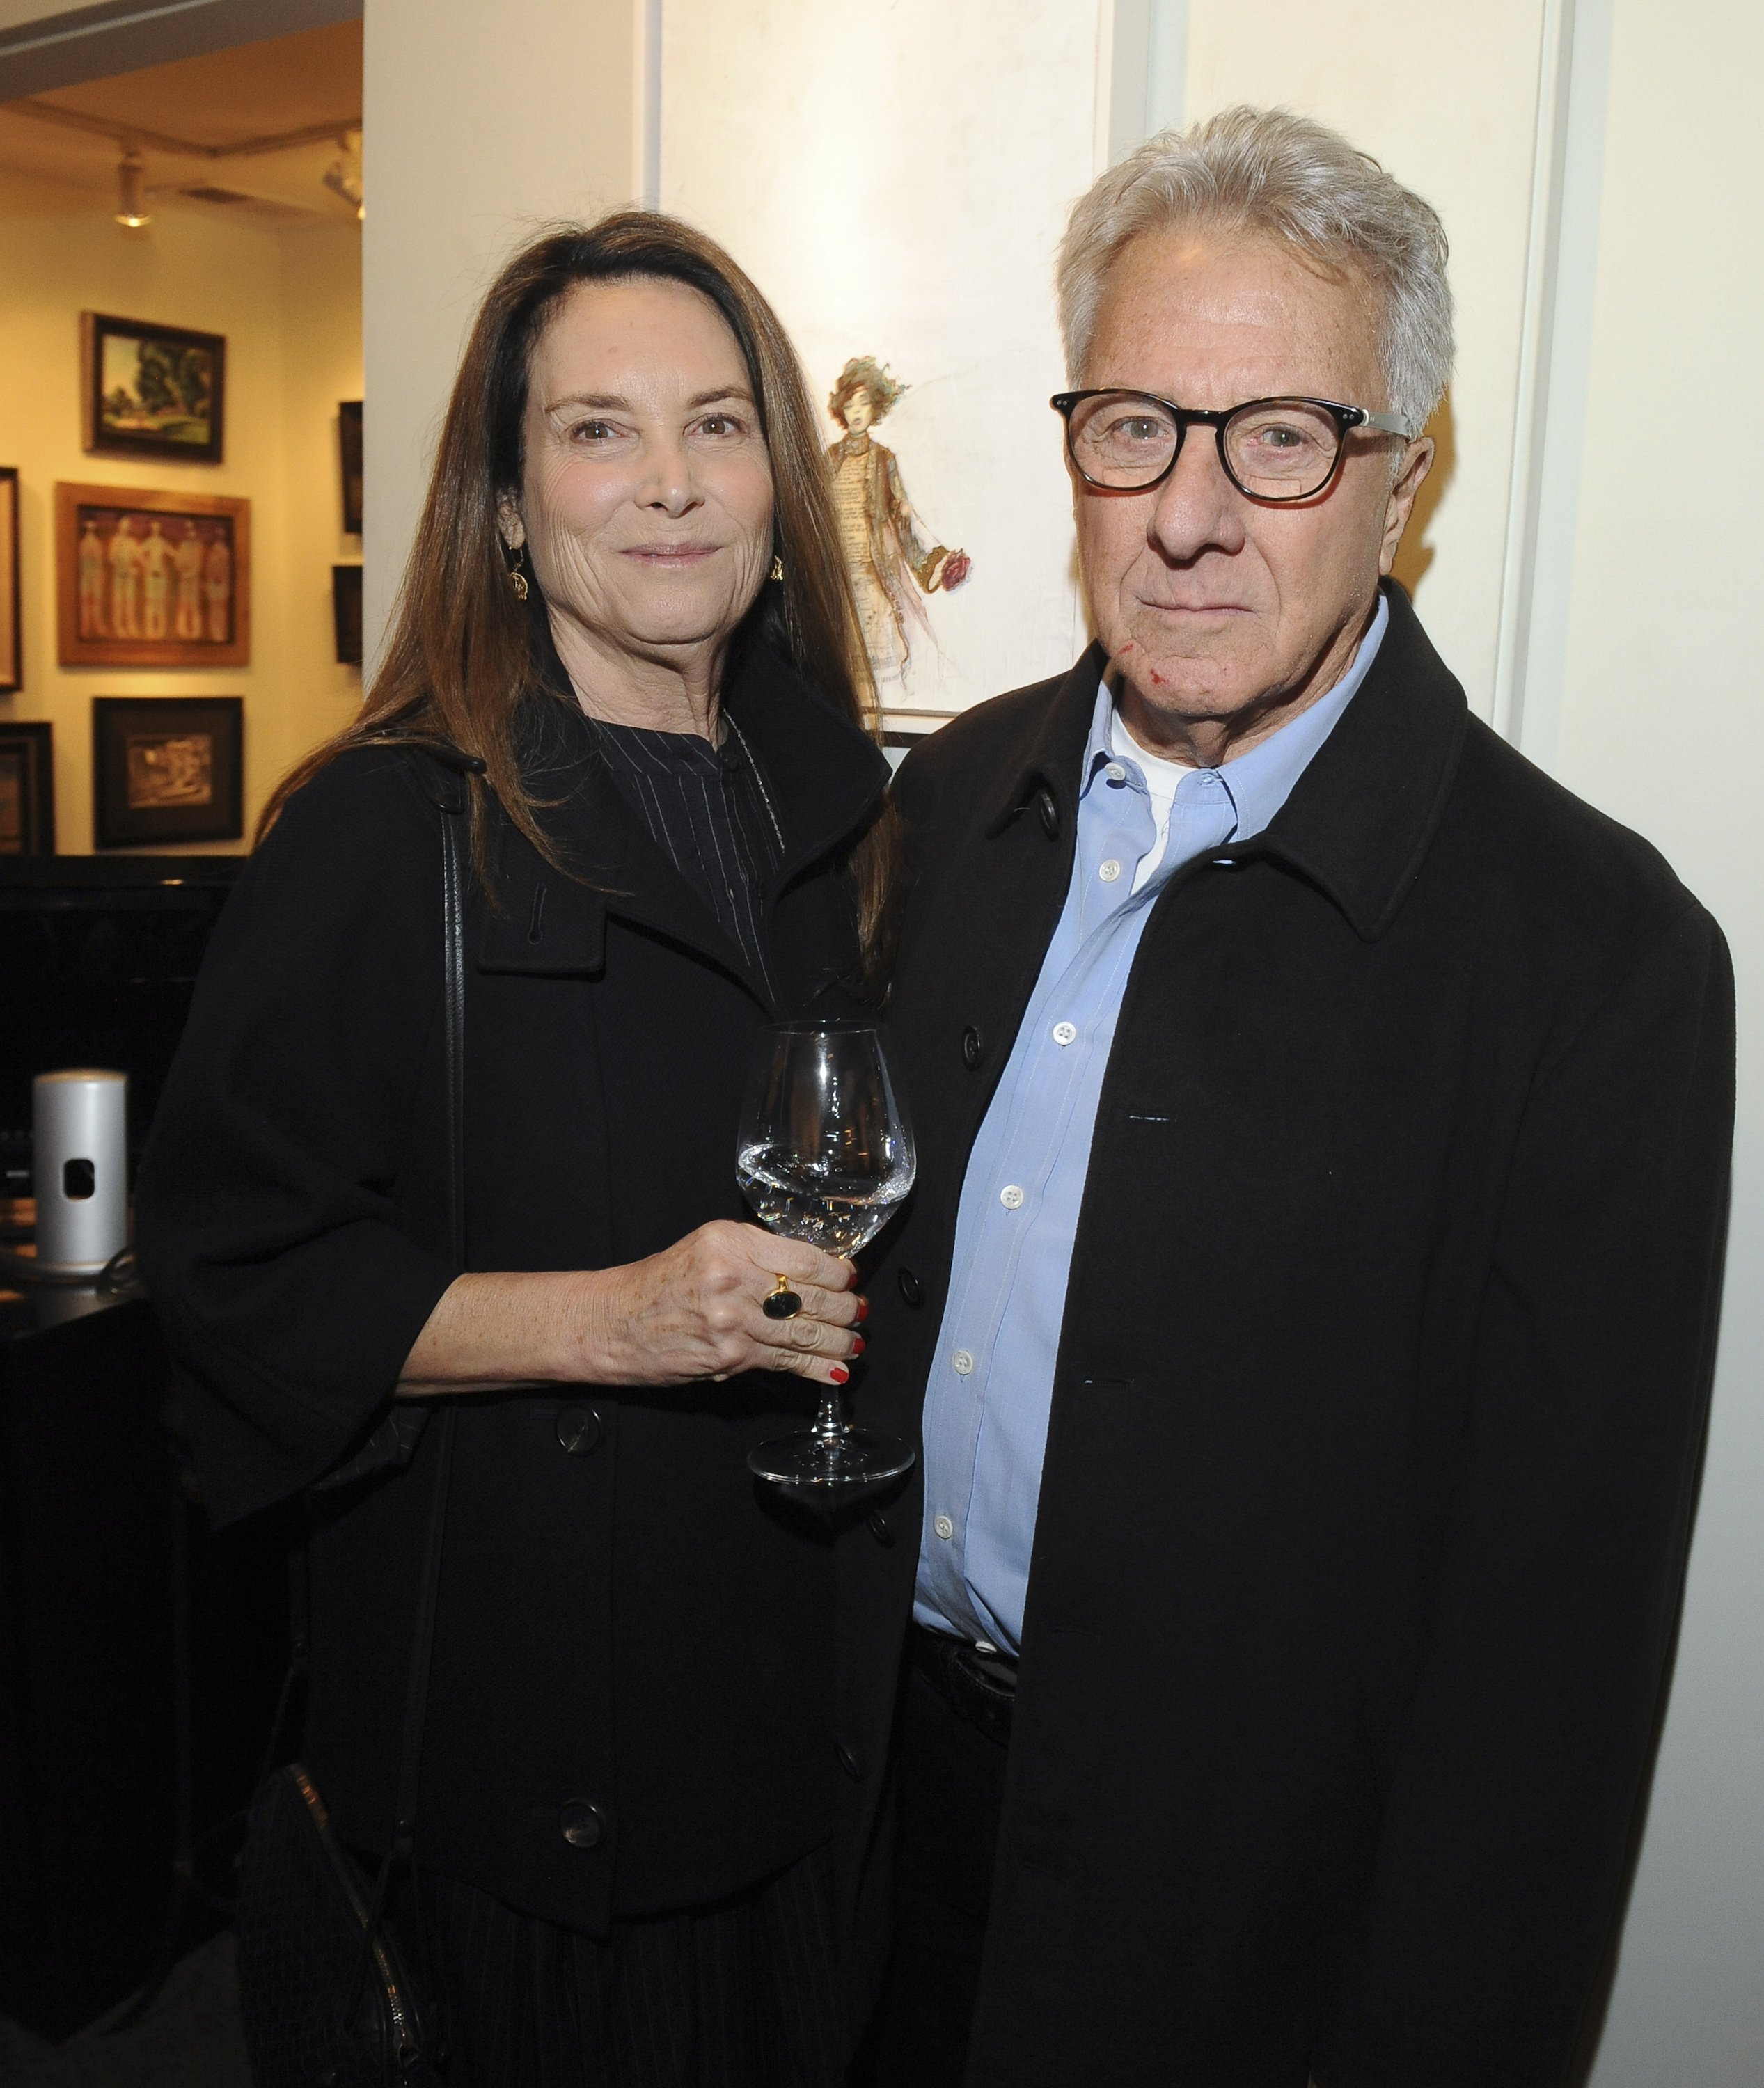 Lisa Hoffman and Dustin Hoffman attend the Trigg Ison Fine Art event on January 10, 2020 in West Hollywood, California. | Source: Getty Images